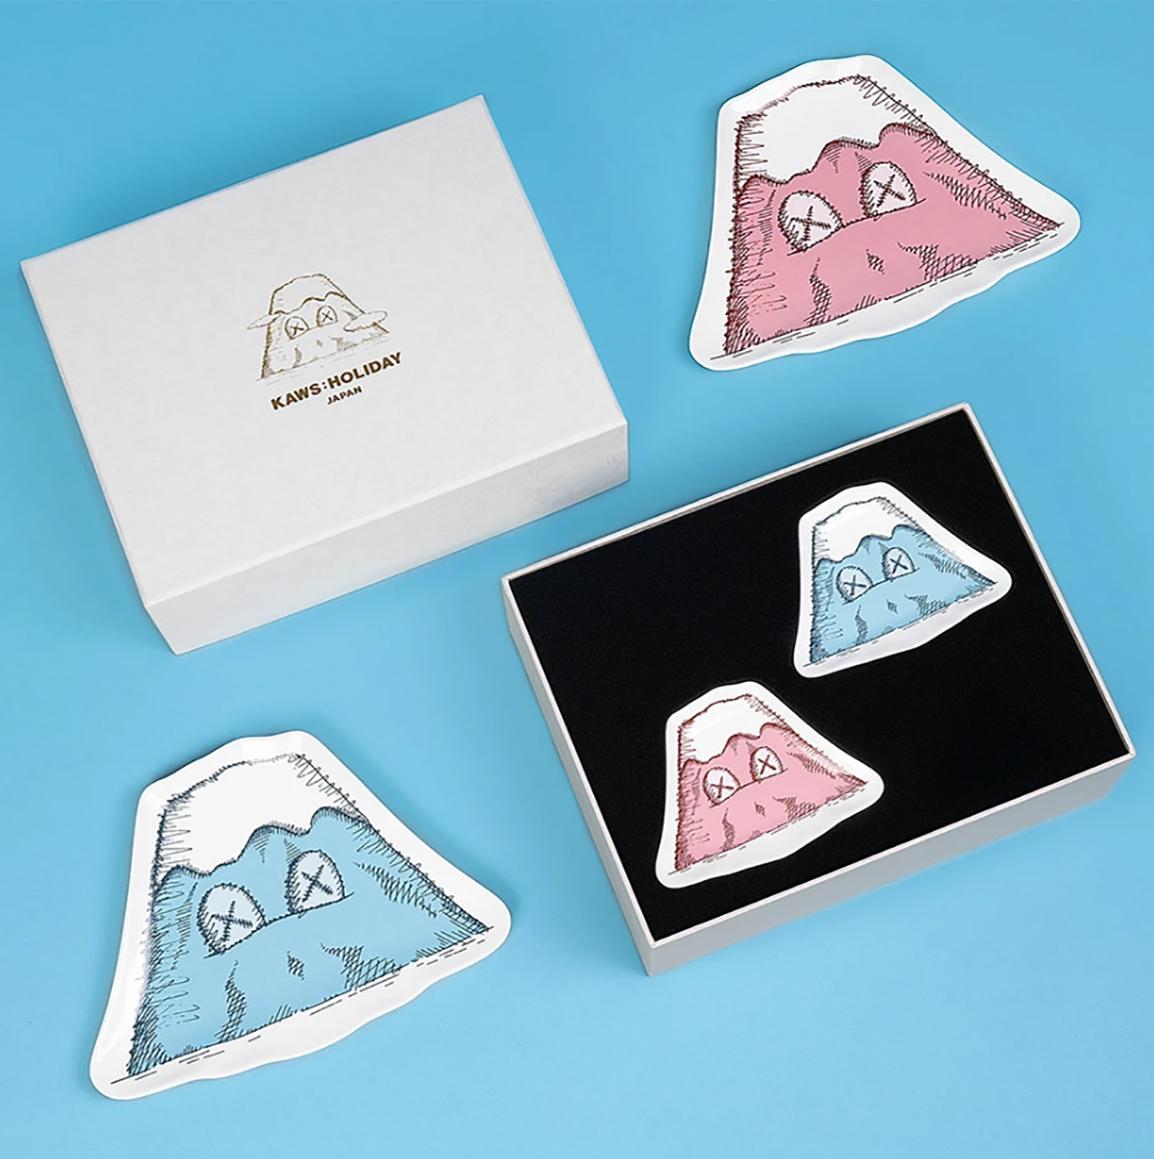 KAWS: HOLIDAY JAPAN Mount Fuji Ceramic Plate Set (Set of 4):
This standout KAWS ceramic plate set was published by All Rights Reserved to commemorate the debut of KAWS’ 40-meters-long figure placed amidst the quaint backdrop of Mount Fuji; set up at